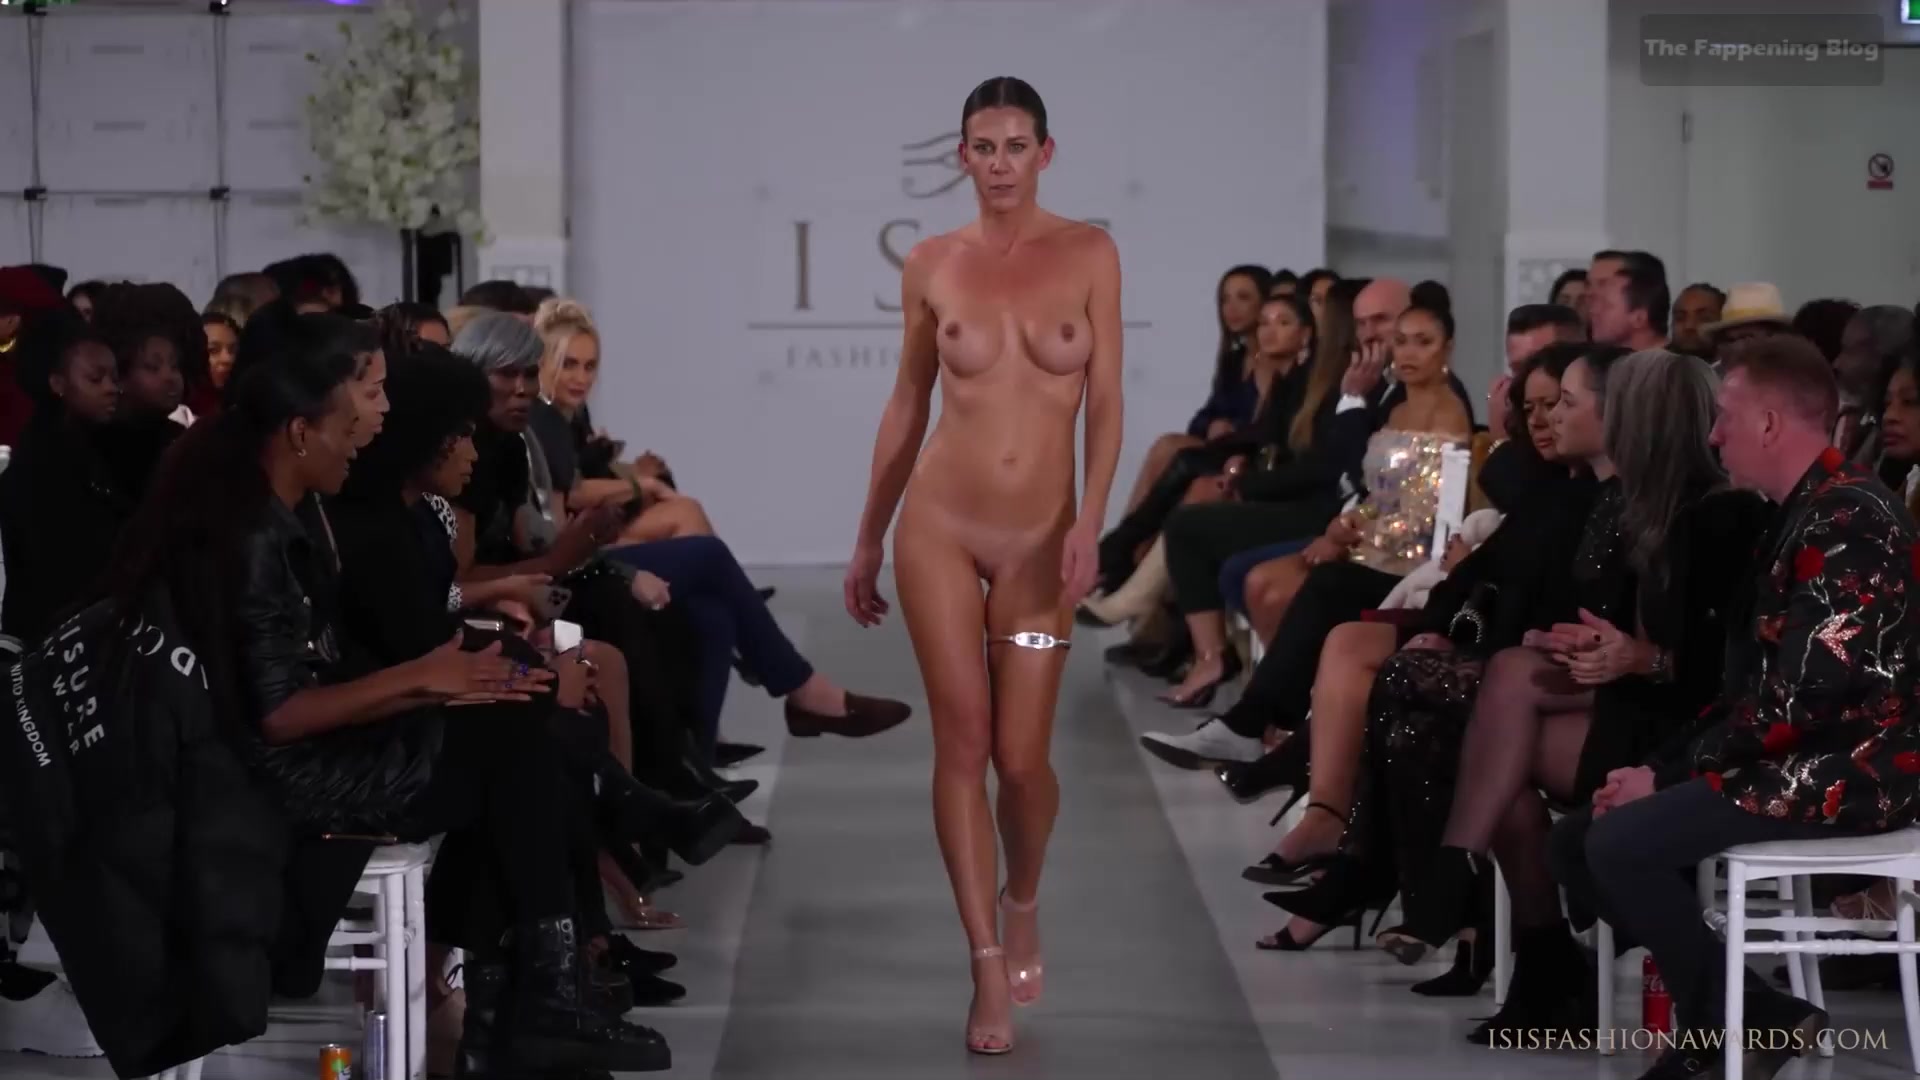 Nude Ramp Walking - Isis Fashion Awards â€“ Nude Accessory Runway Catwalk Show (Video) |  #TheFappening